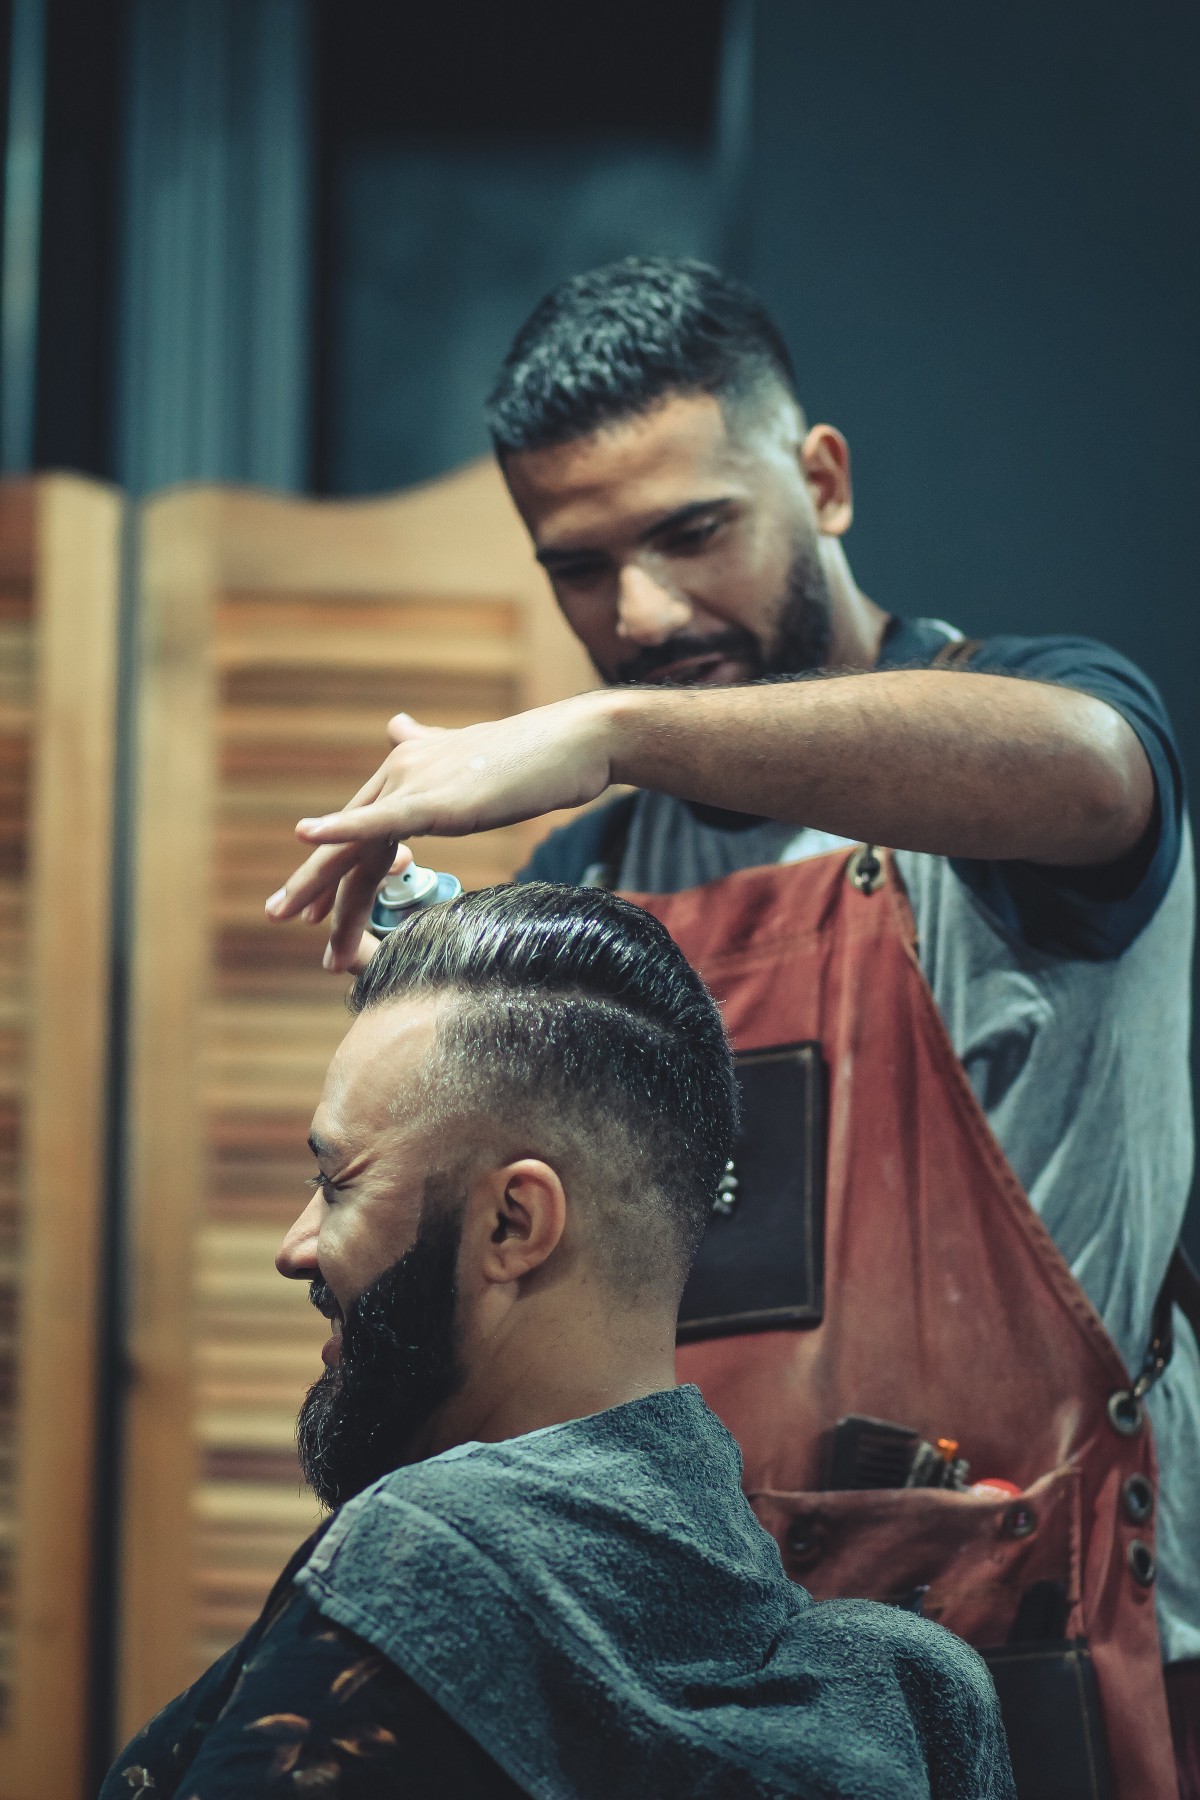 Easy Selling Strategy: Beginner Sales Tips from a Barber